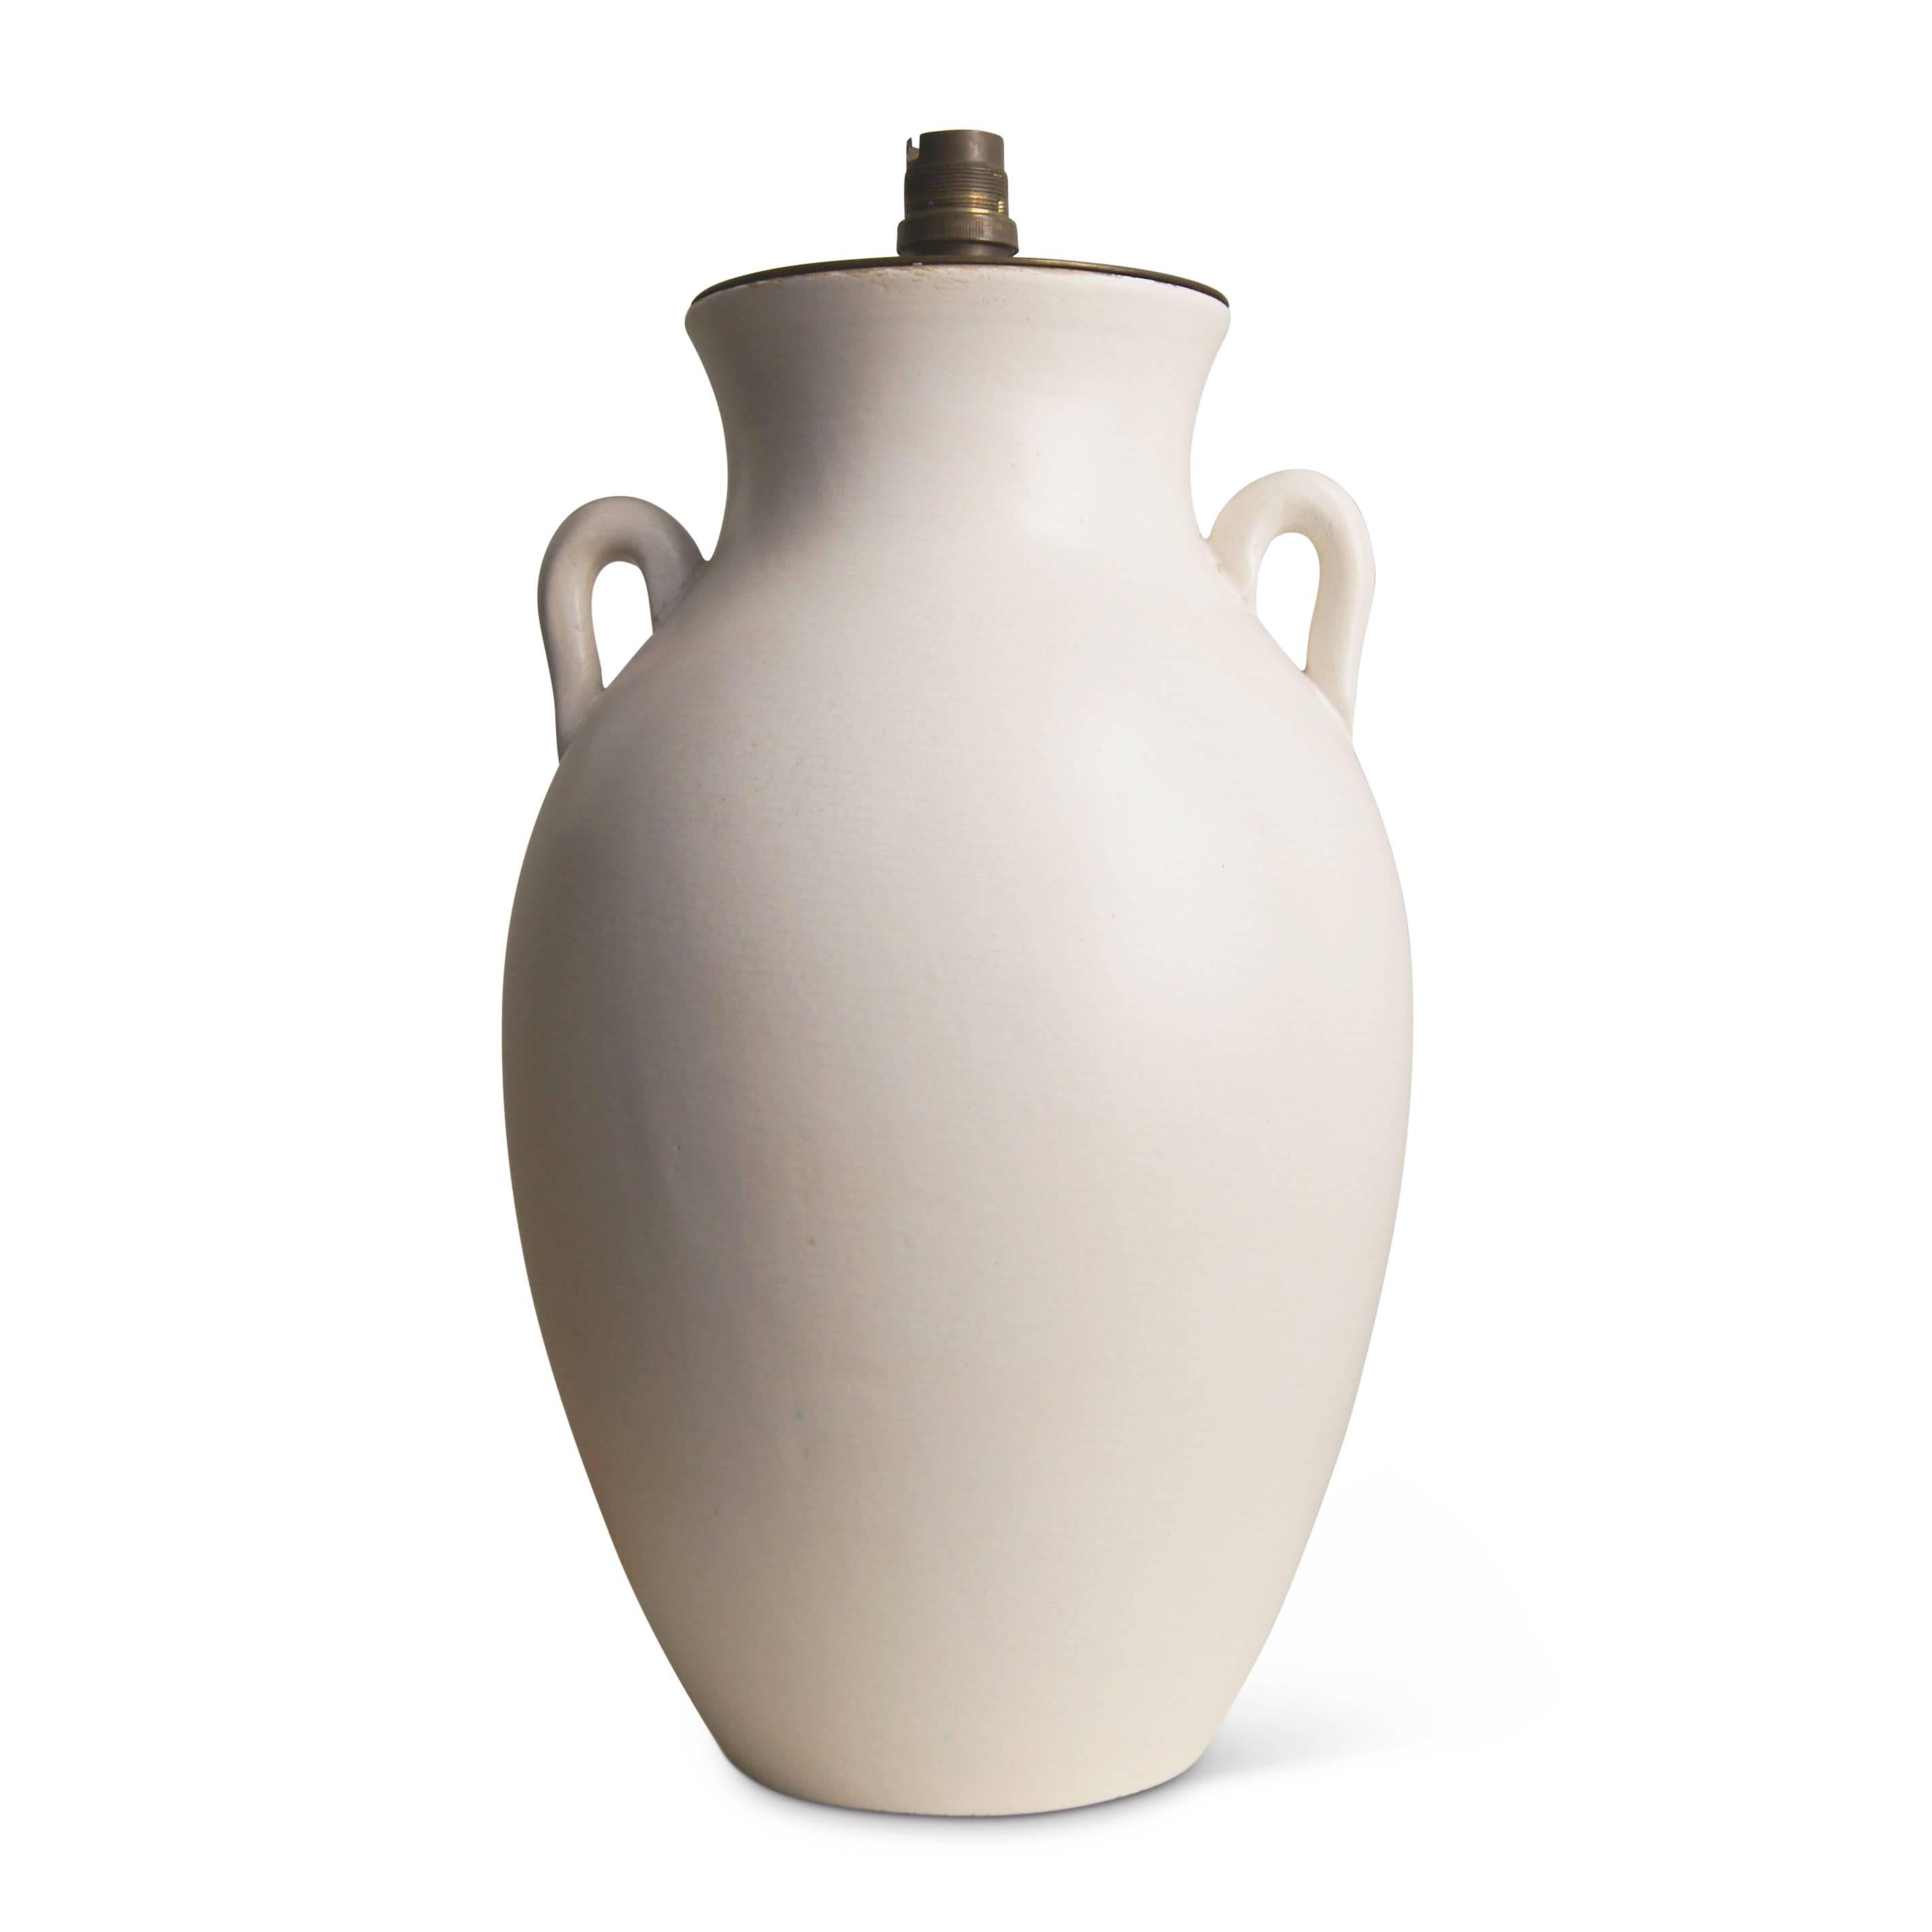 Elegant Mid-Century adaptation of a Classical Amphora form, perfectly proportioned and modeled in a lovely eggshell finish ivory glaze, this lamp by French pottery house Keramos is exquisite in every detail, and radiates the sculptural and dreamy